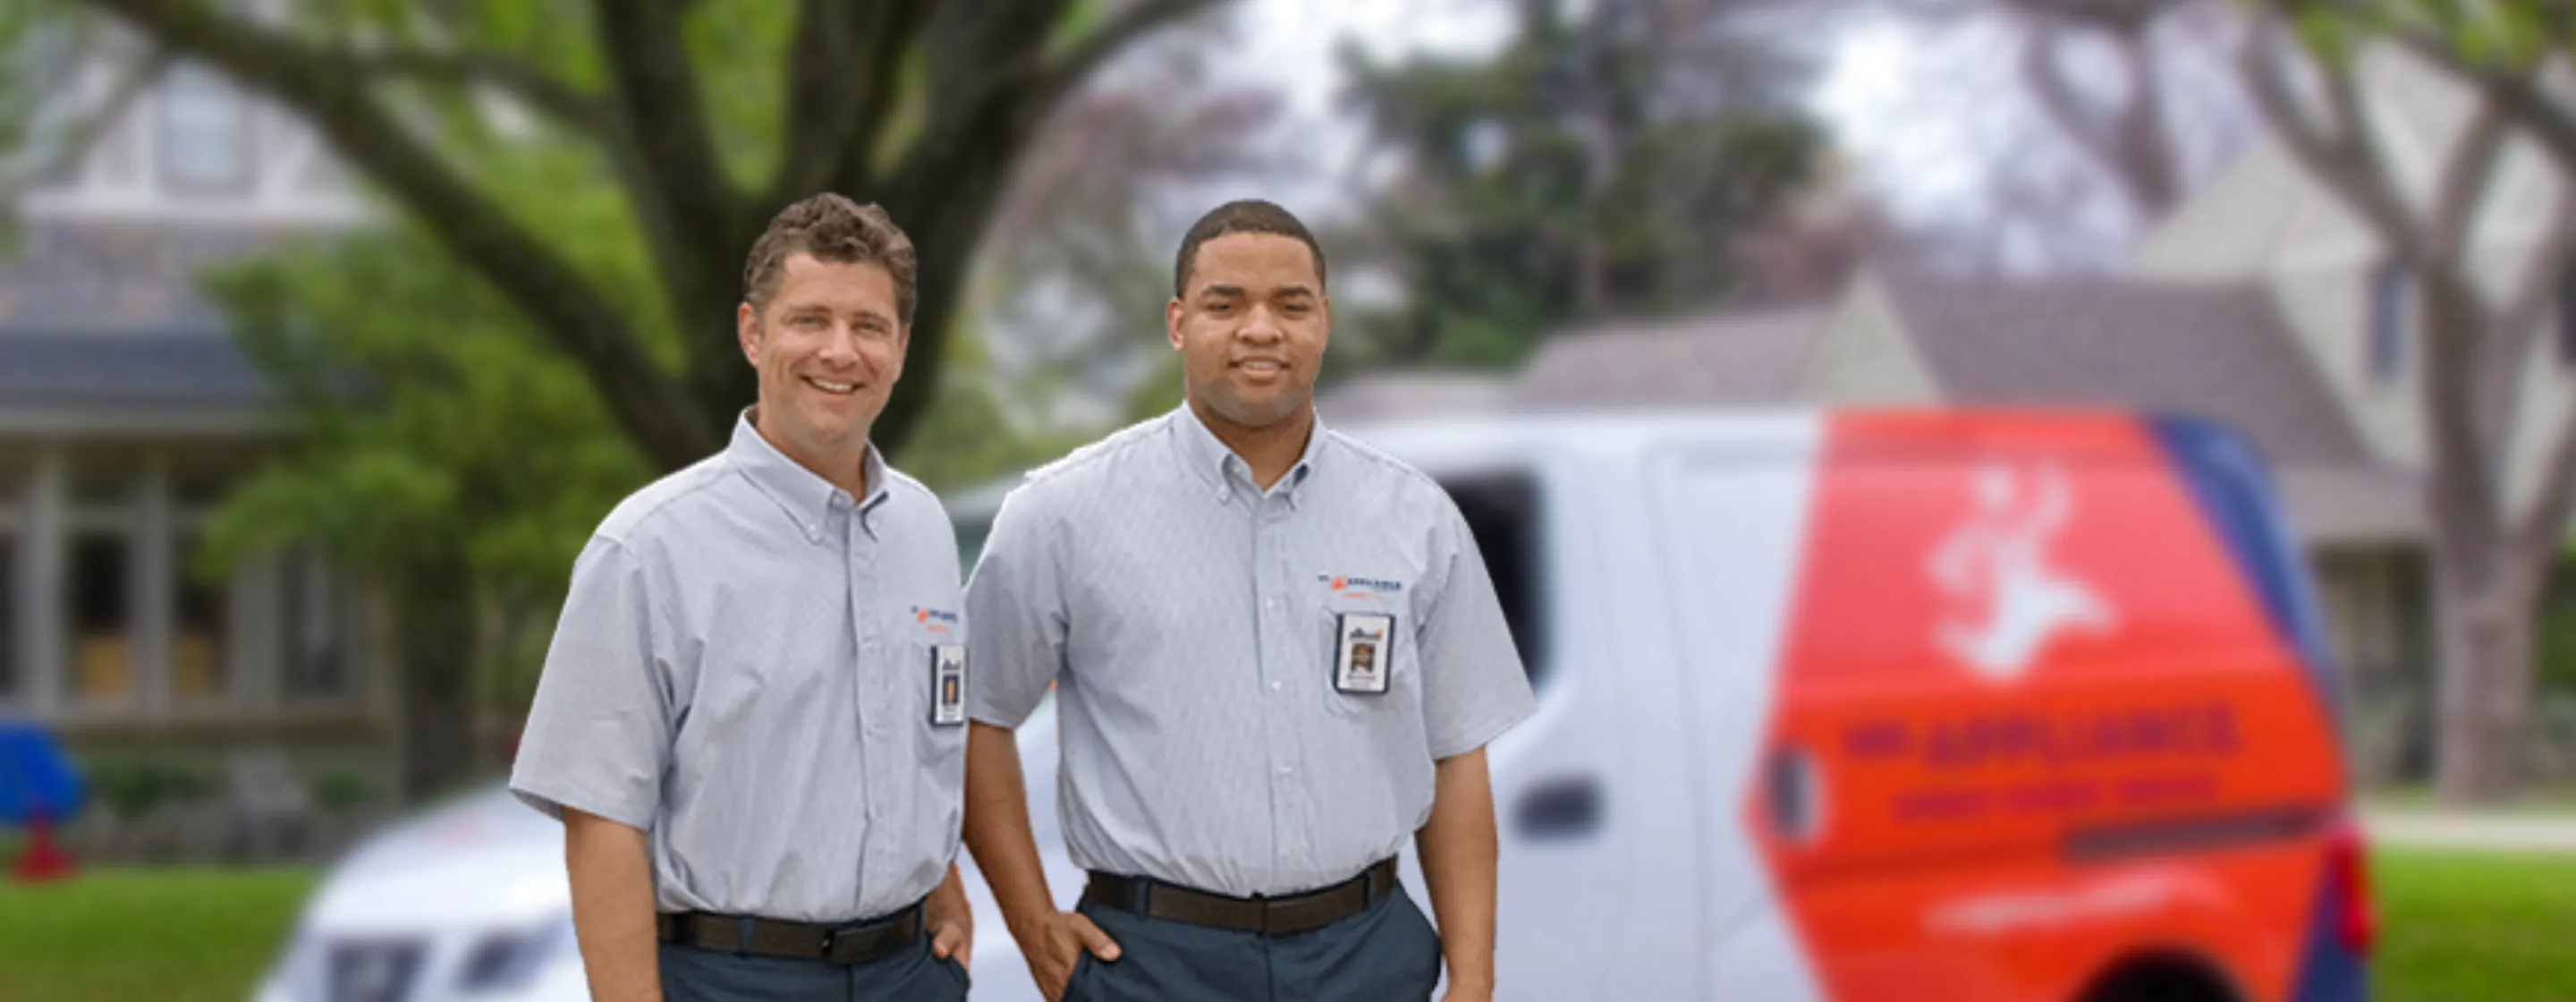 Two male technicians standing in front of a Mr. Appliance branded van.